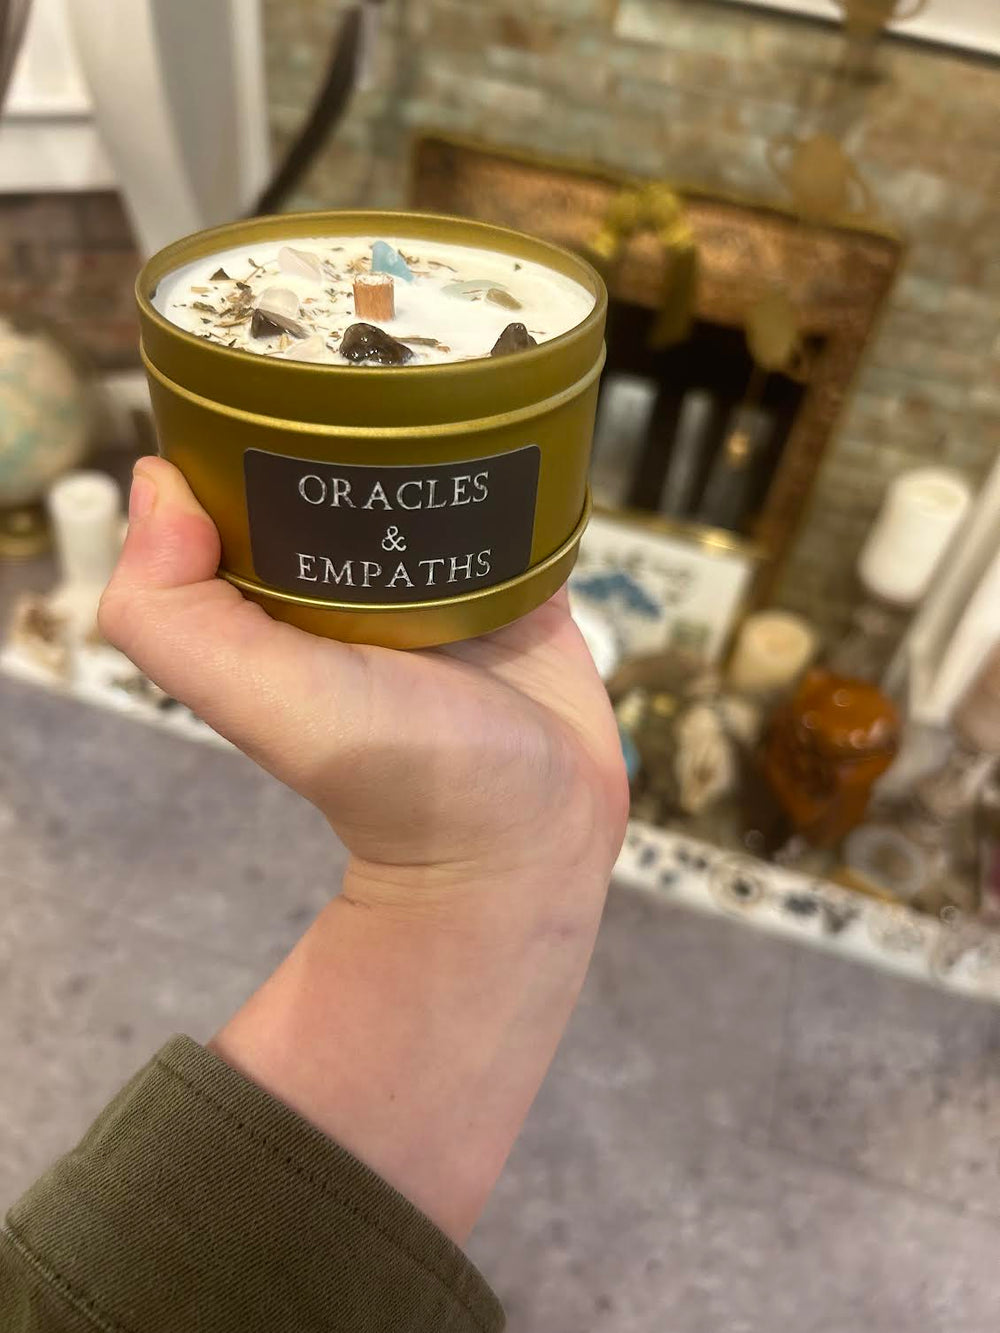 this is the front of the Oracles and Empaths candle